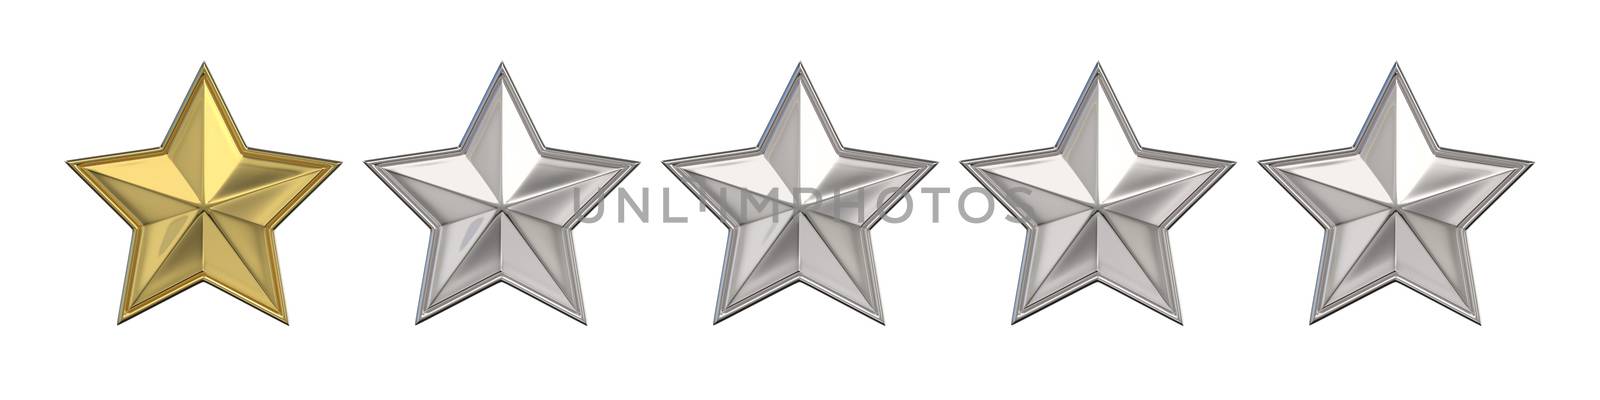 Voting concept. Rating one golden star. 3D render illustration isolated on white background